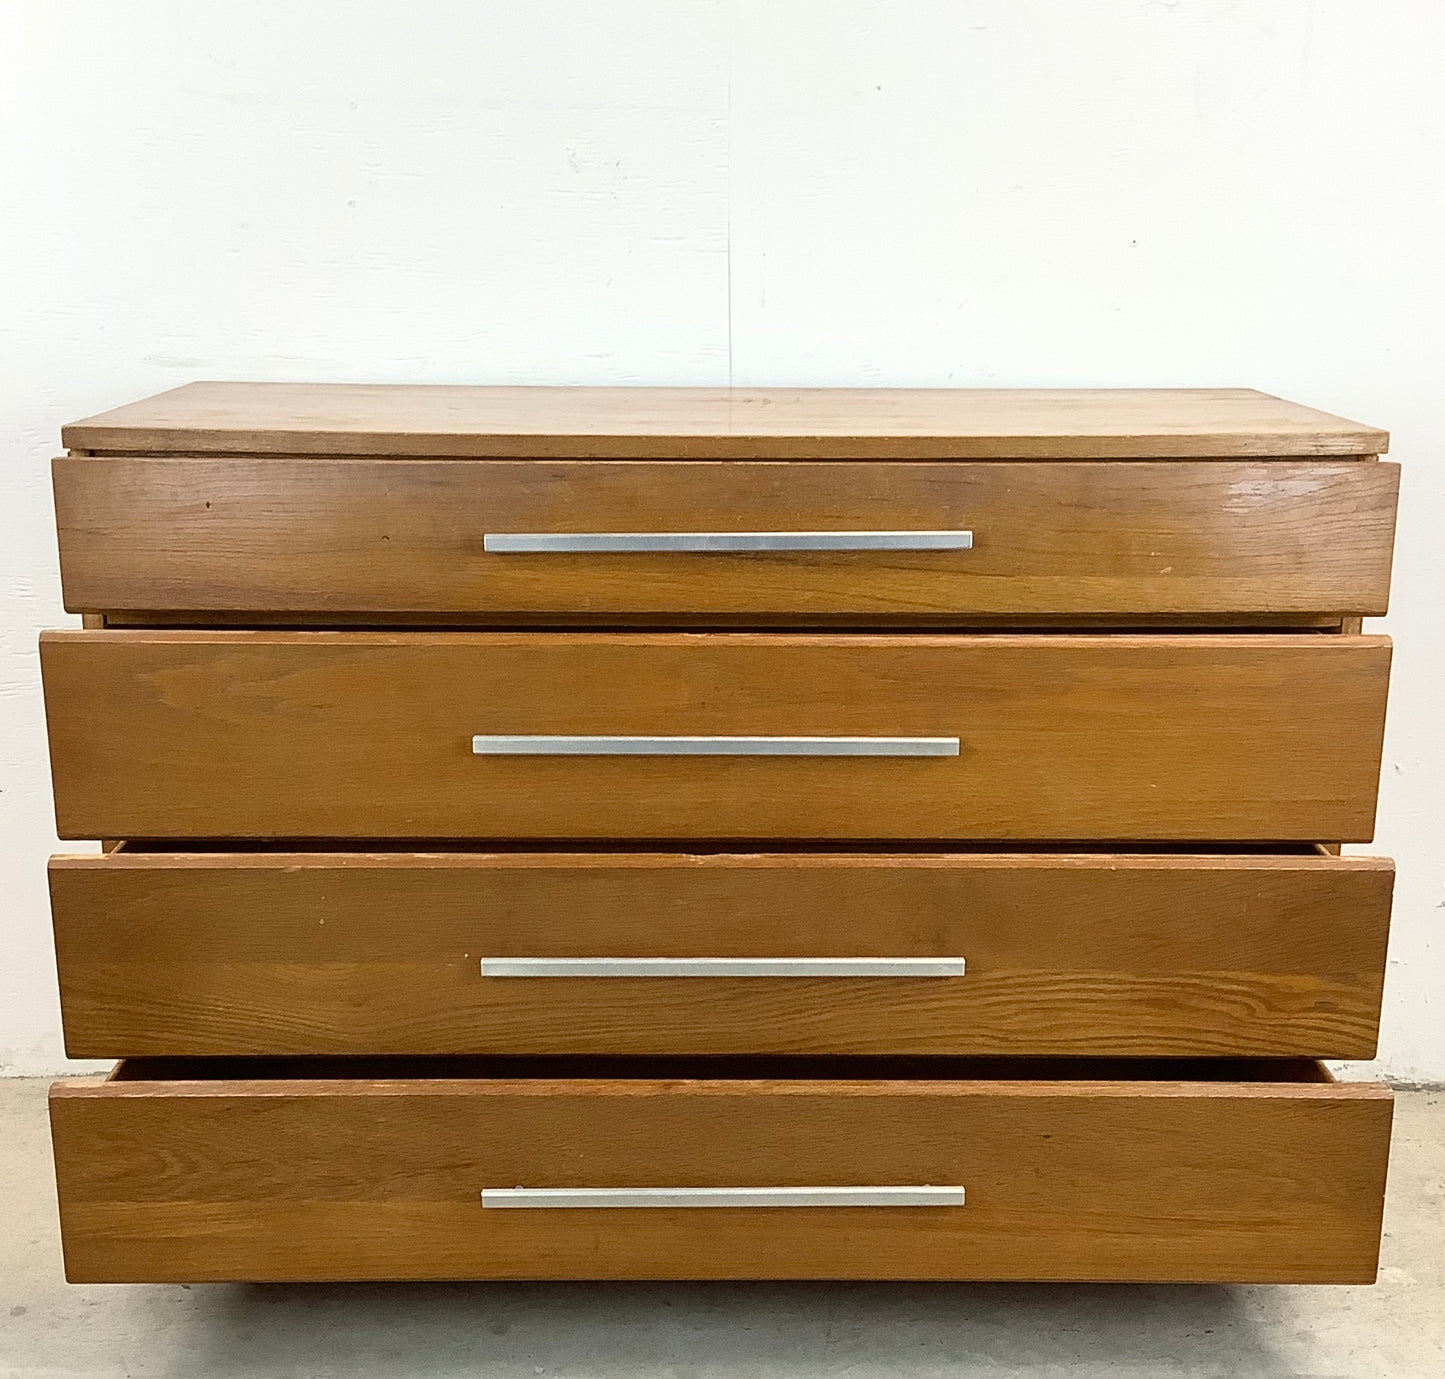 Mid-Century Four Drawer Chest attr. Raymond Loewy for Mengel Furniture